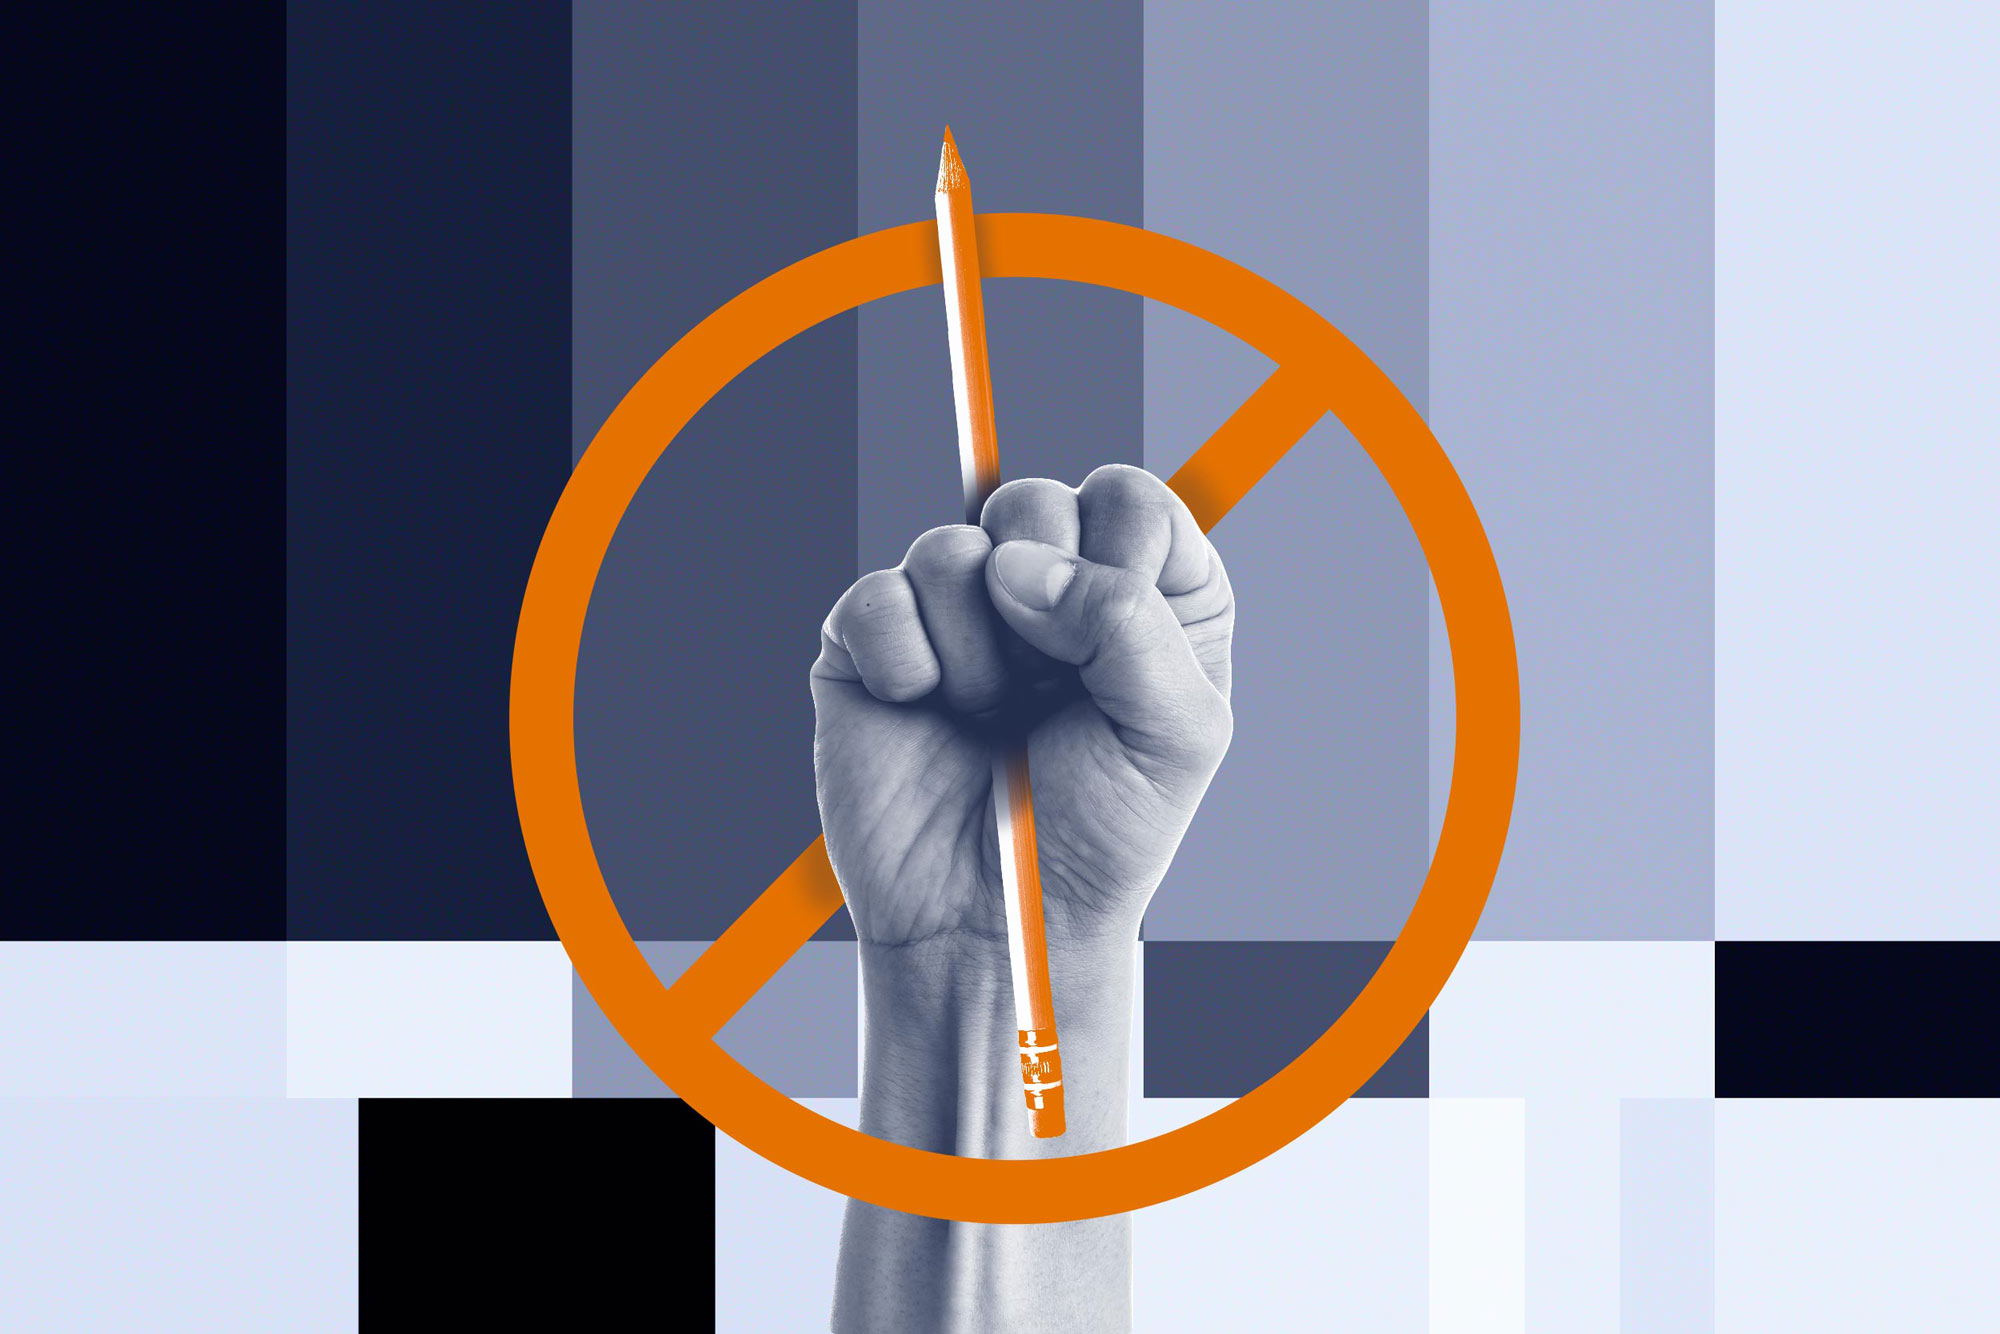 Fist holding a pencil with a "no" circle around it